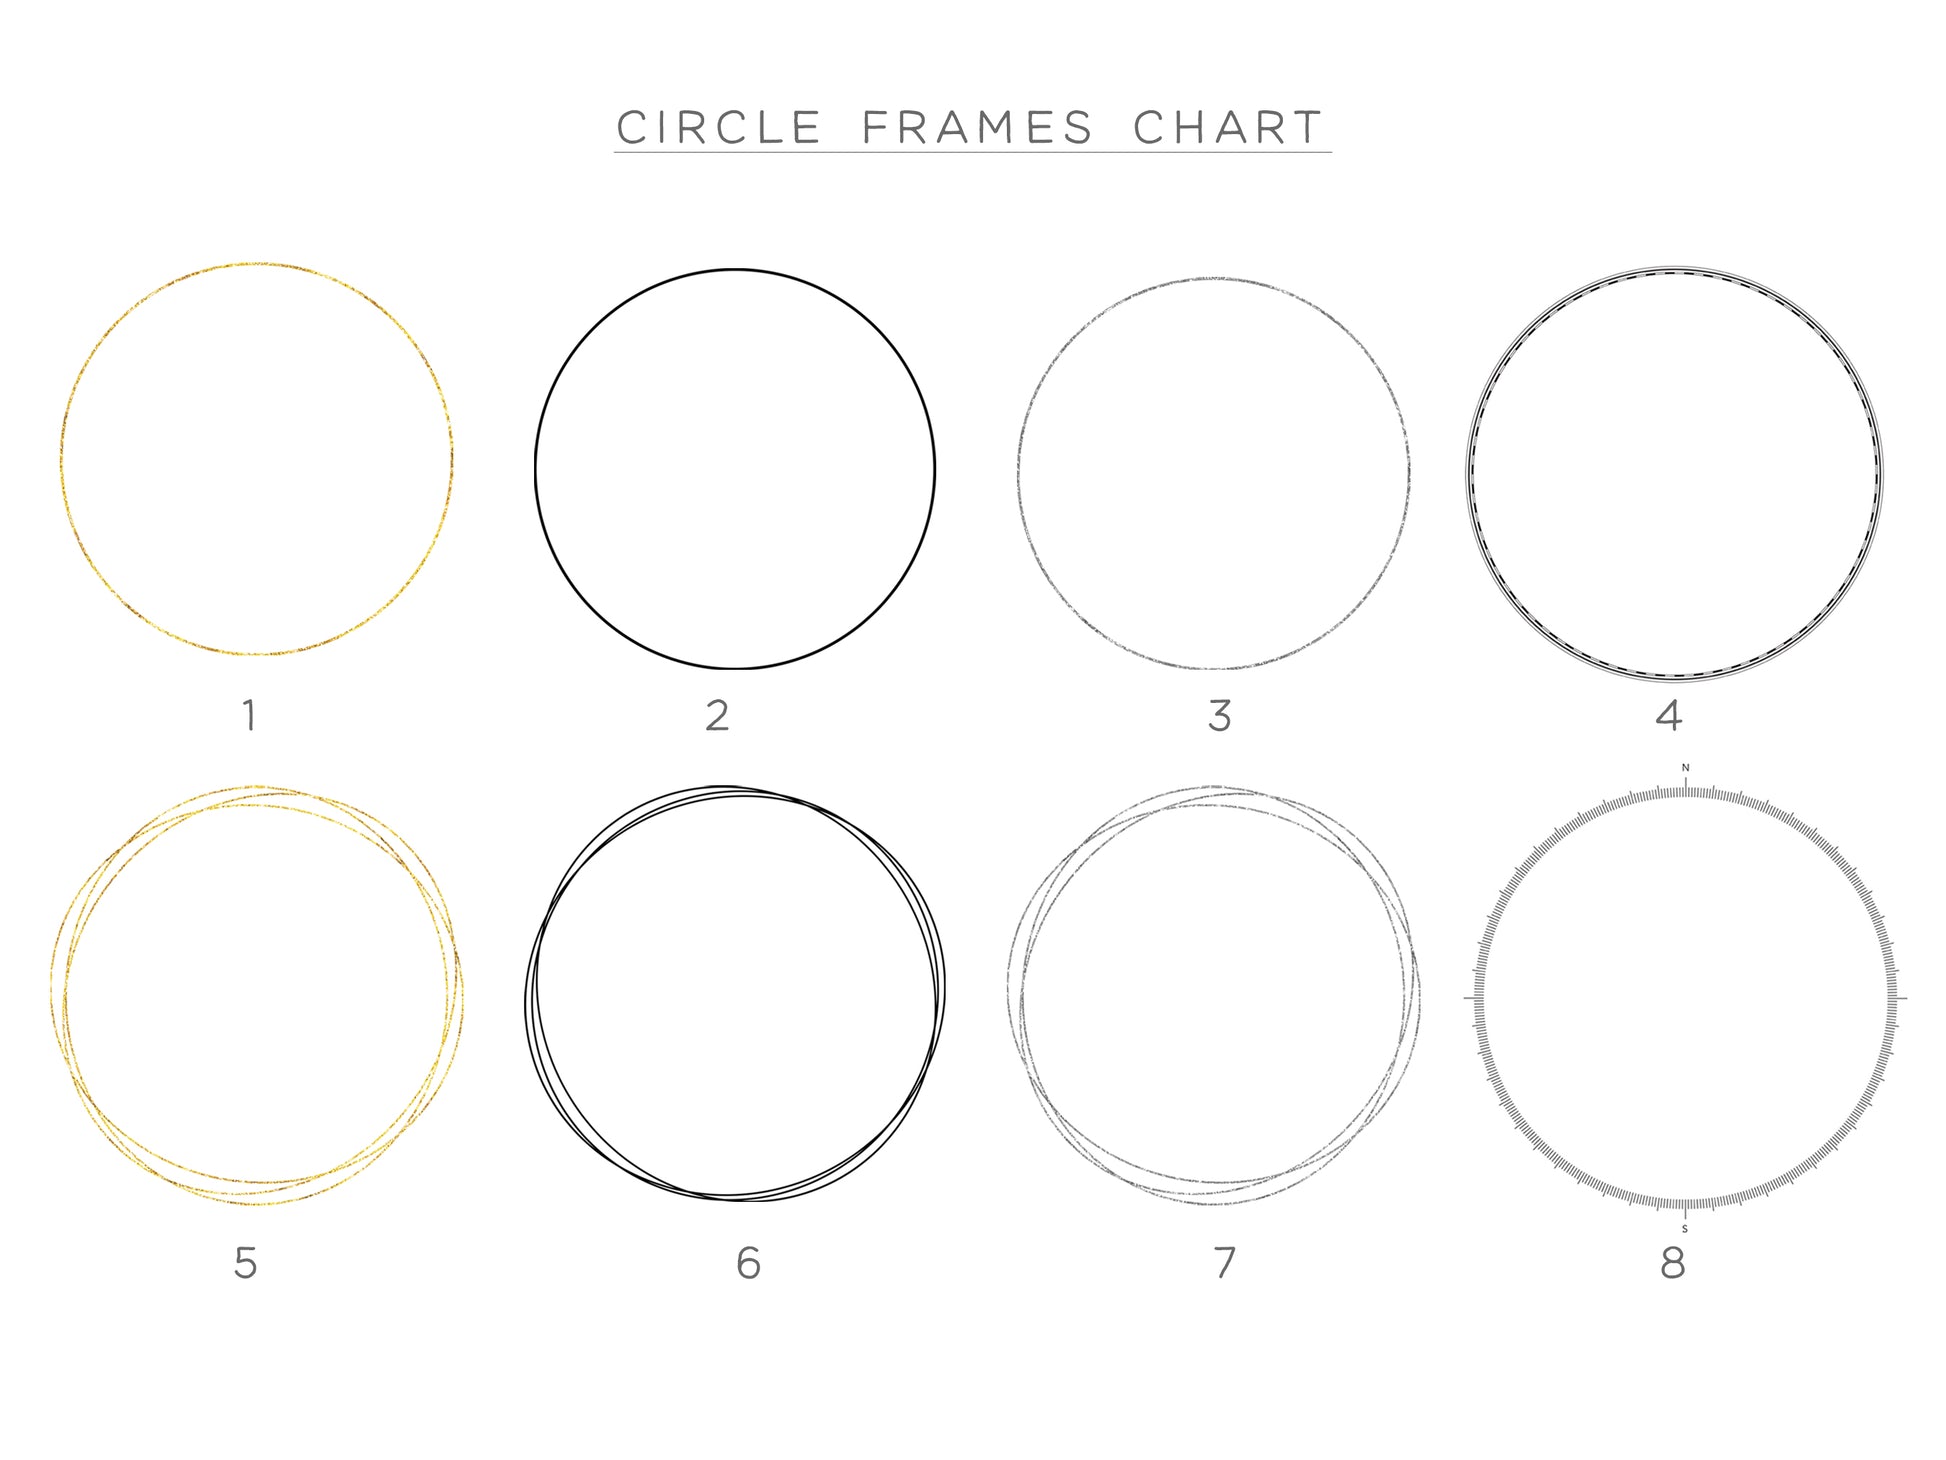 a circle frames chart with different sizes and colors